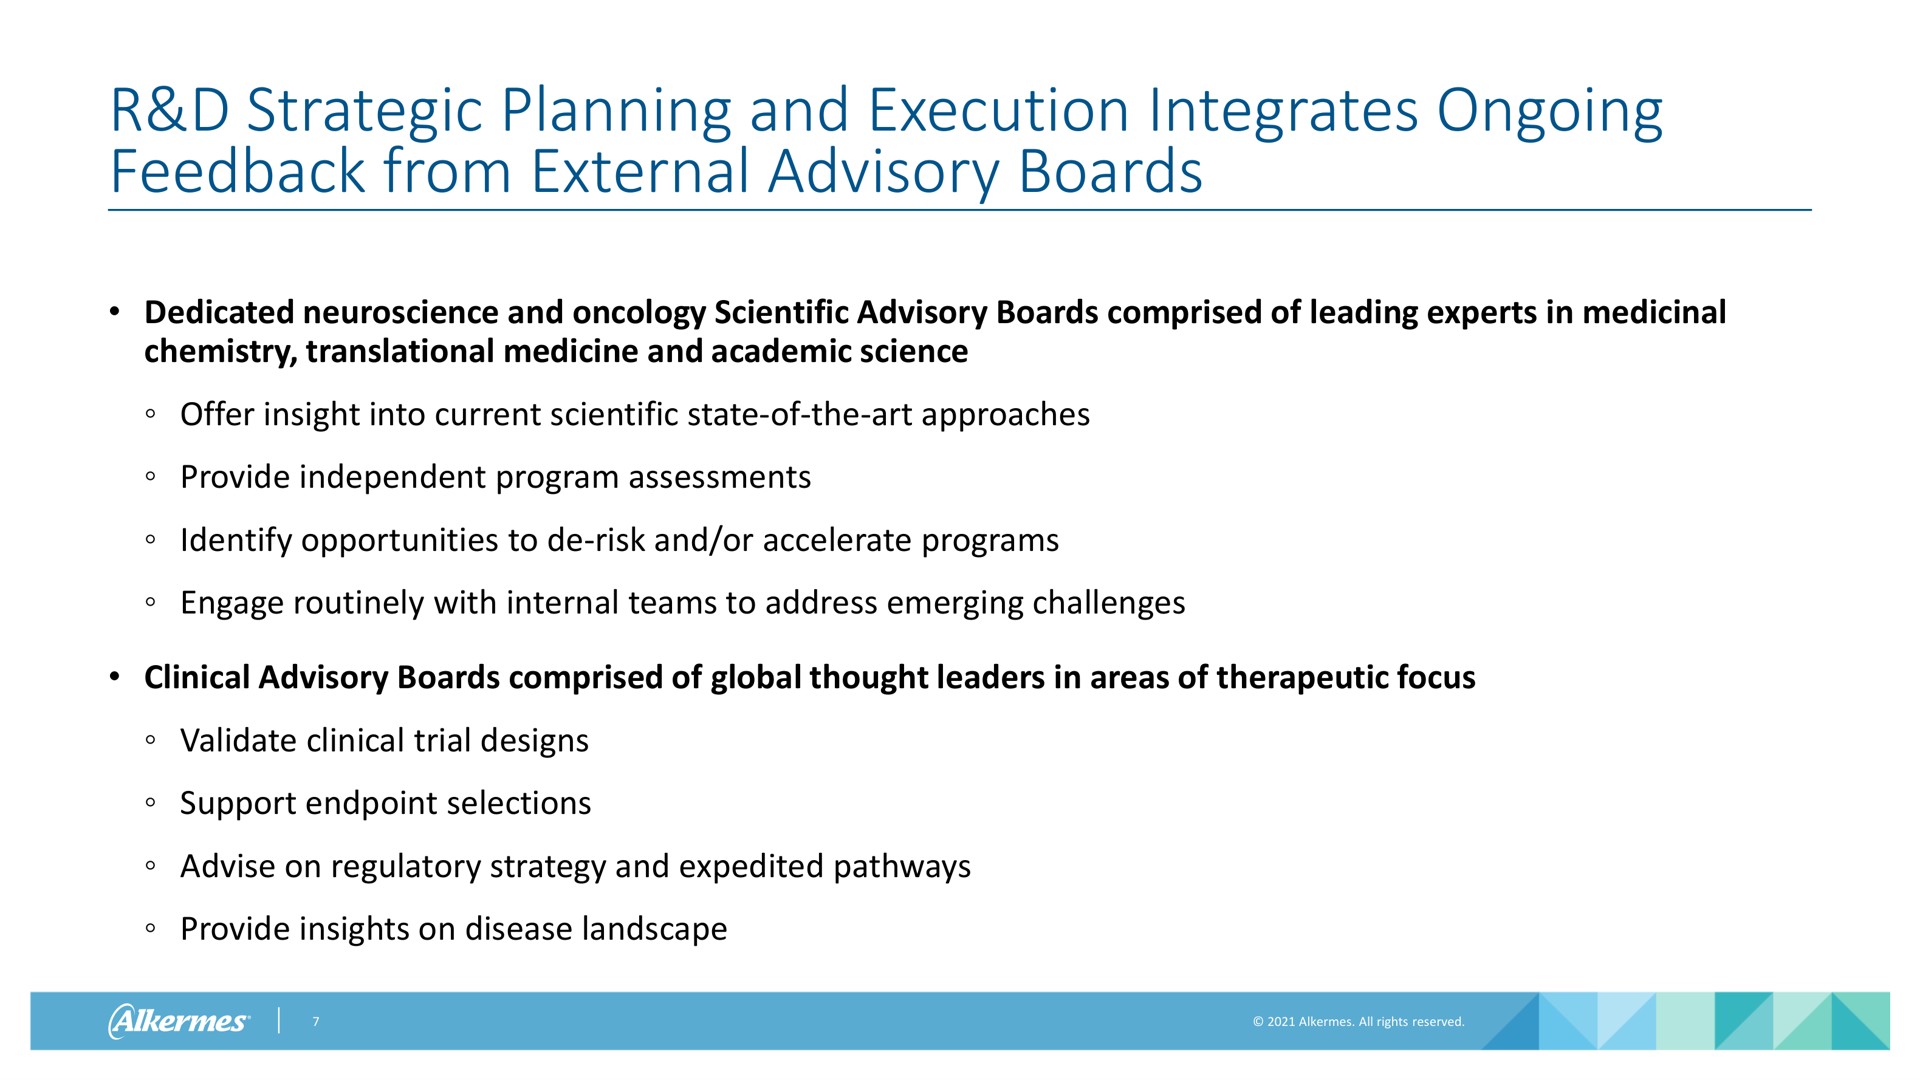 strategic planning and execution integrates ongoing feedback from external advisory boards dedicated and oncology scientific advisory boards comprised of leading experts in medicinal chemistry translational medicine and academic science offer insight into current scientific state of the art approaches provide independent program assessments identify opportunities to risk and or accelerate programs engage routinely with internal teams to address emerging challenges clinical advisory boards comprised of global thought leaders in areas of therapeutic focus validate clinical trial designs support selections advise on regulatory strategy and expedited pathways provide insights on disease landscape | Alkermes